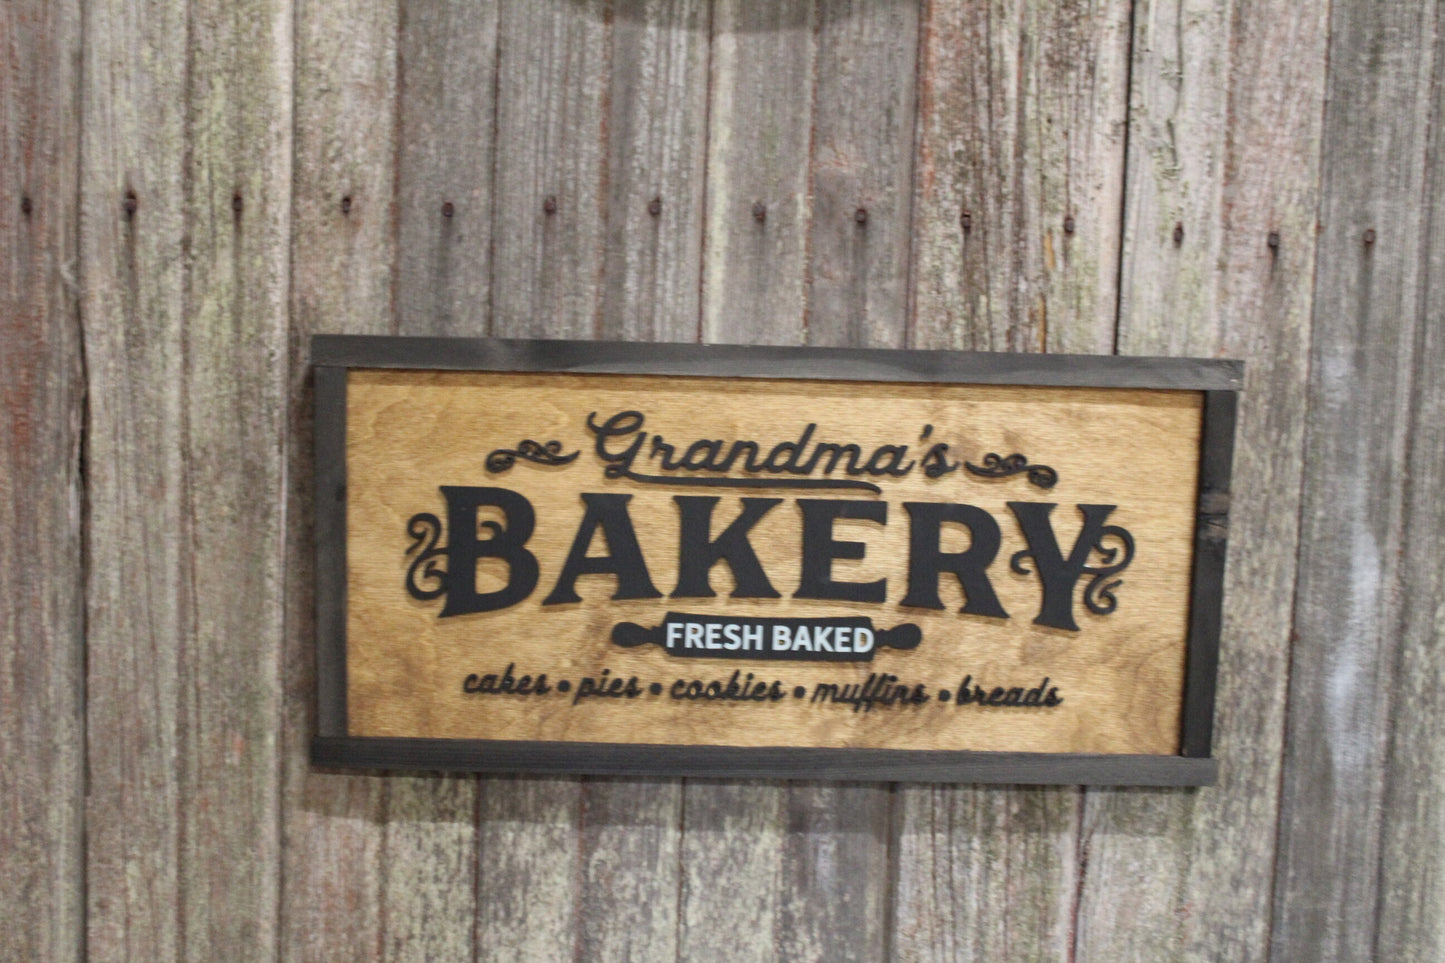 Grandmas Bakery Kitchen Wood Sign 3D Raised Text Fresh Baked Pies Cakes Cookies Mothers Day Gift Granny Handmade Rustic Primitive